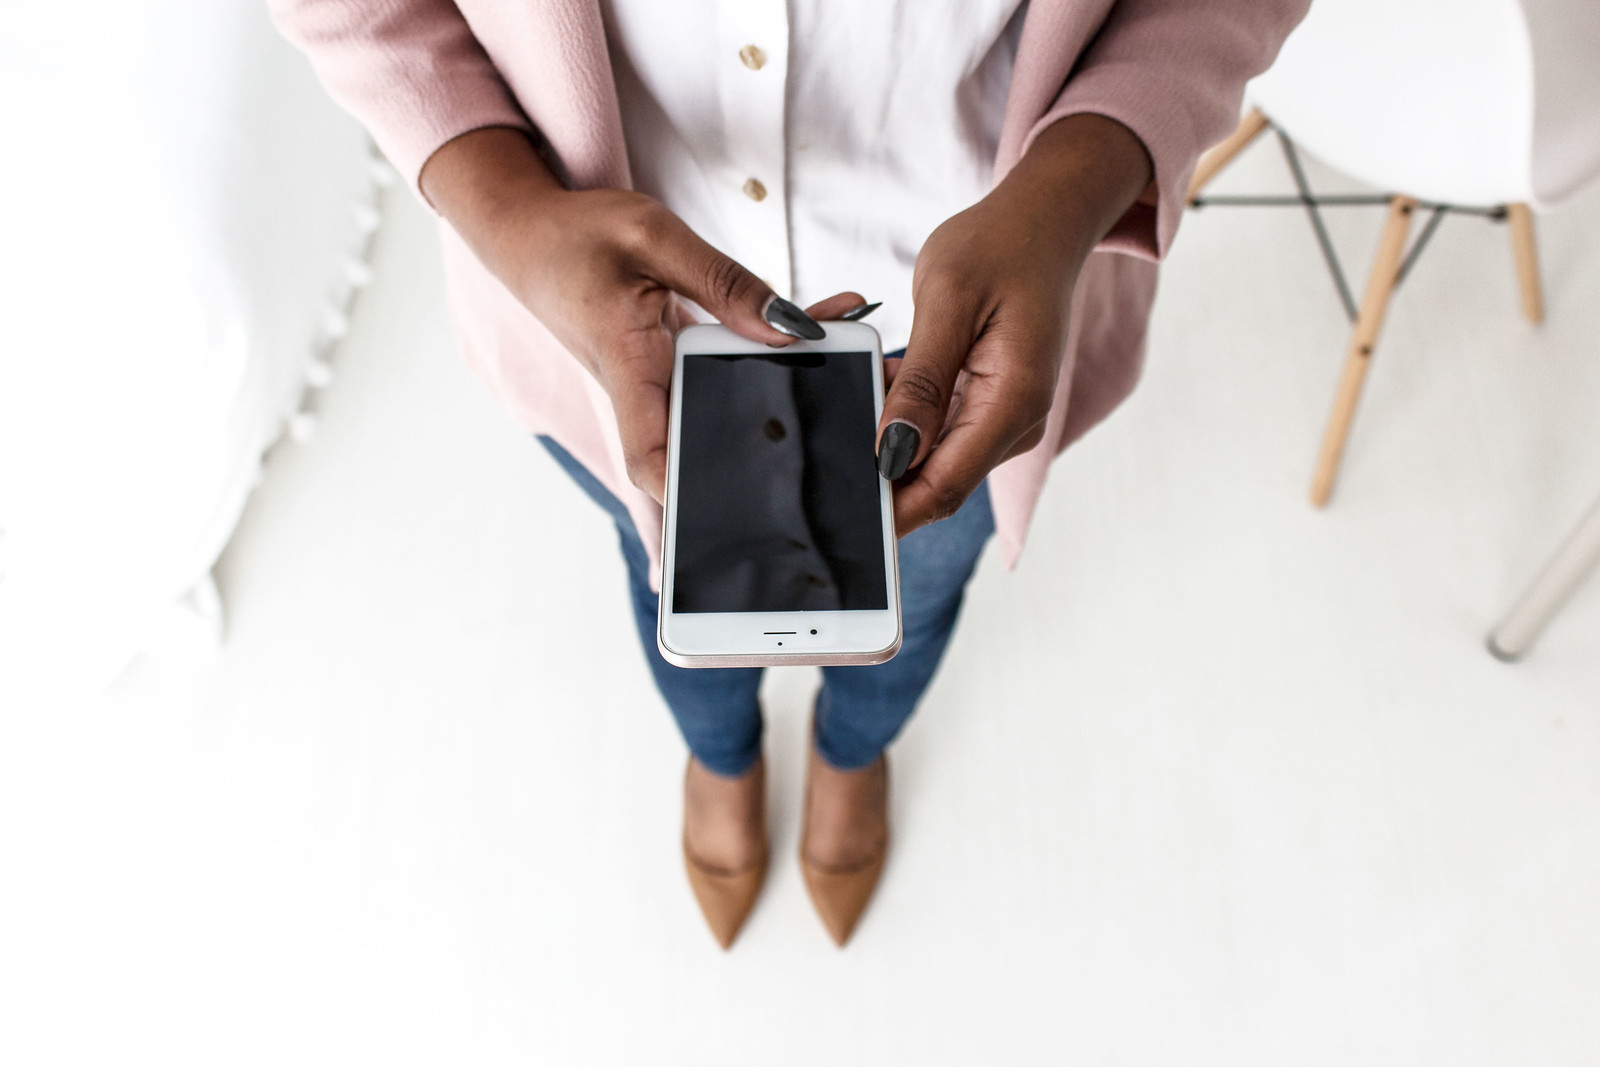 African-American woman holding iPhone